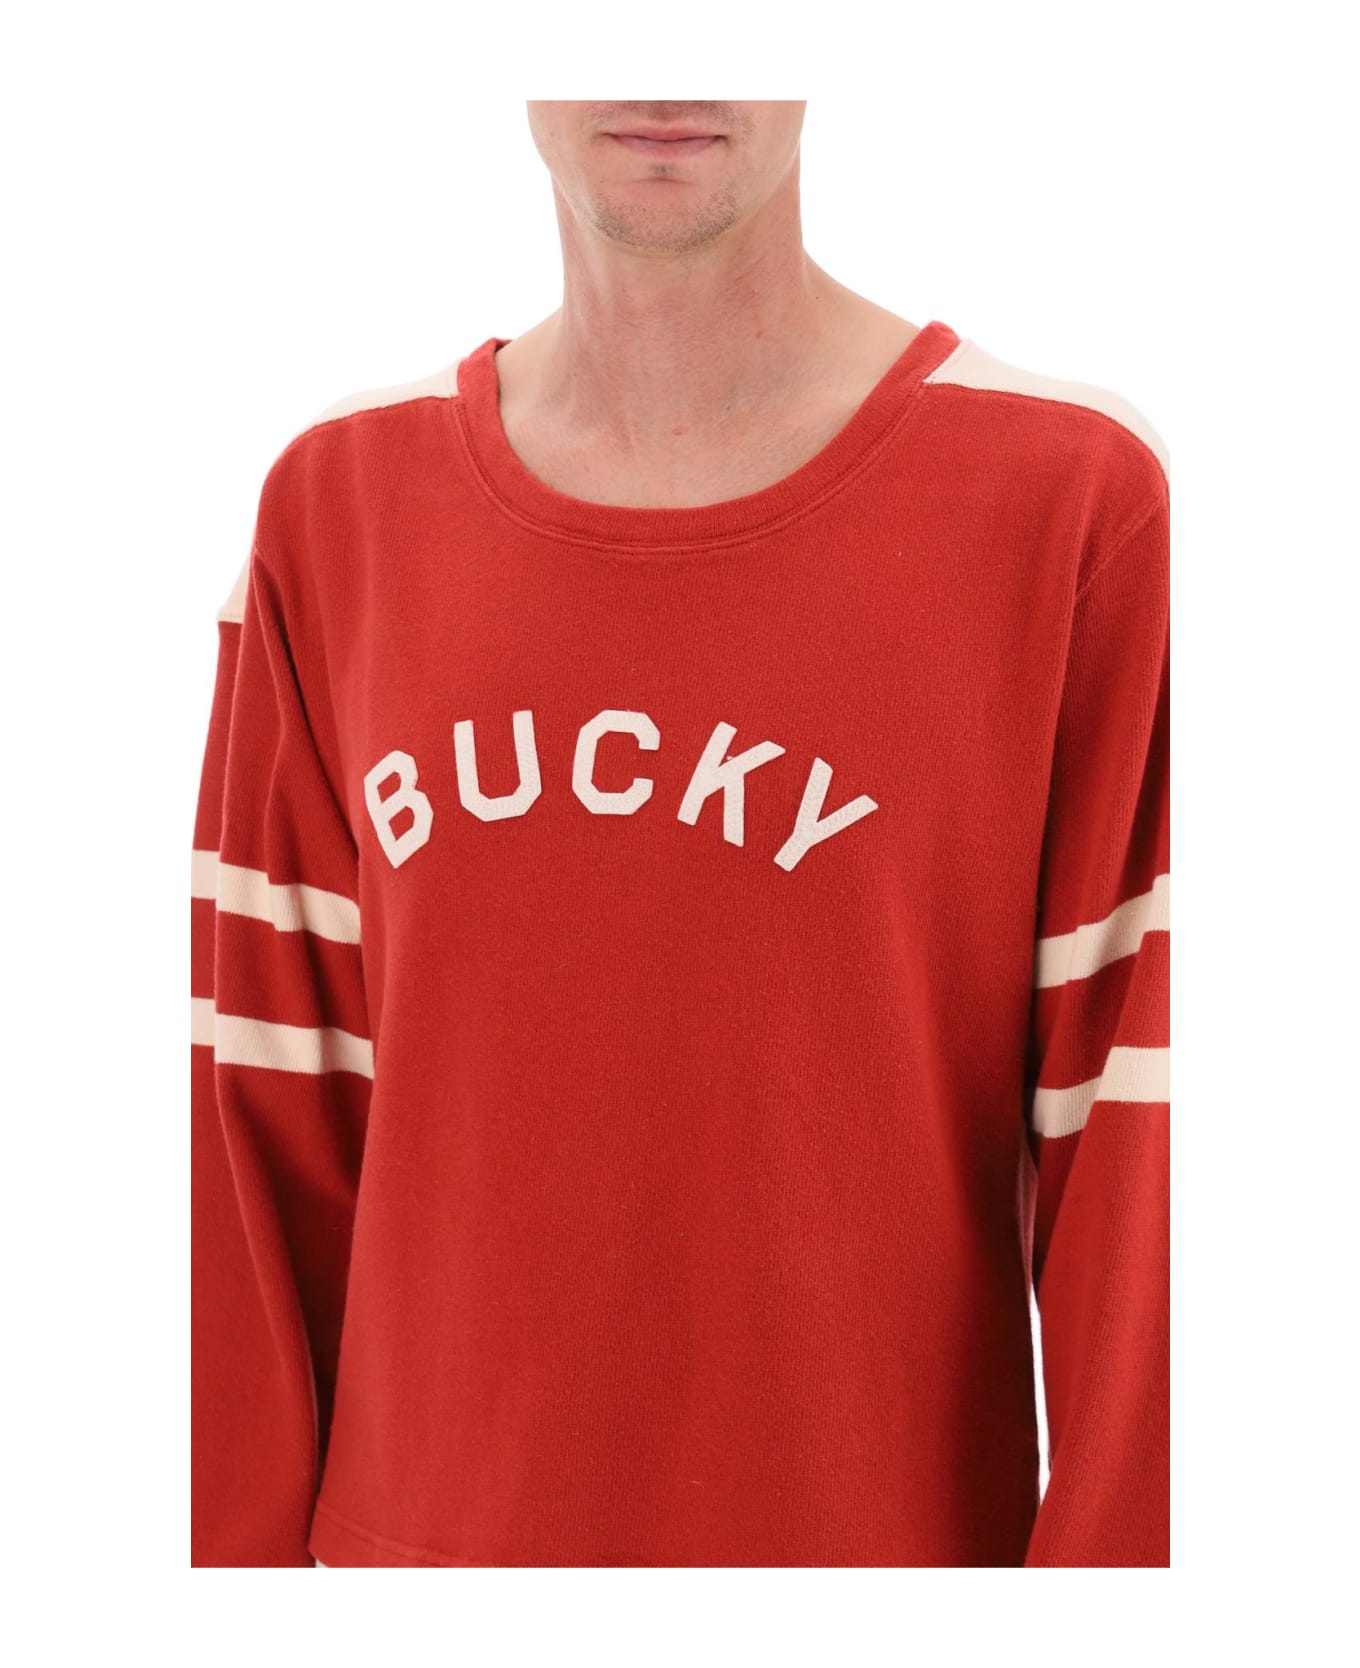 Bode Bucky Two-tone Cotton Sweater - RED ECRU (Red)